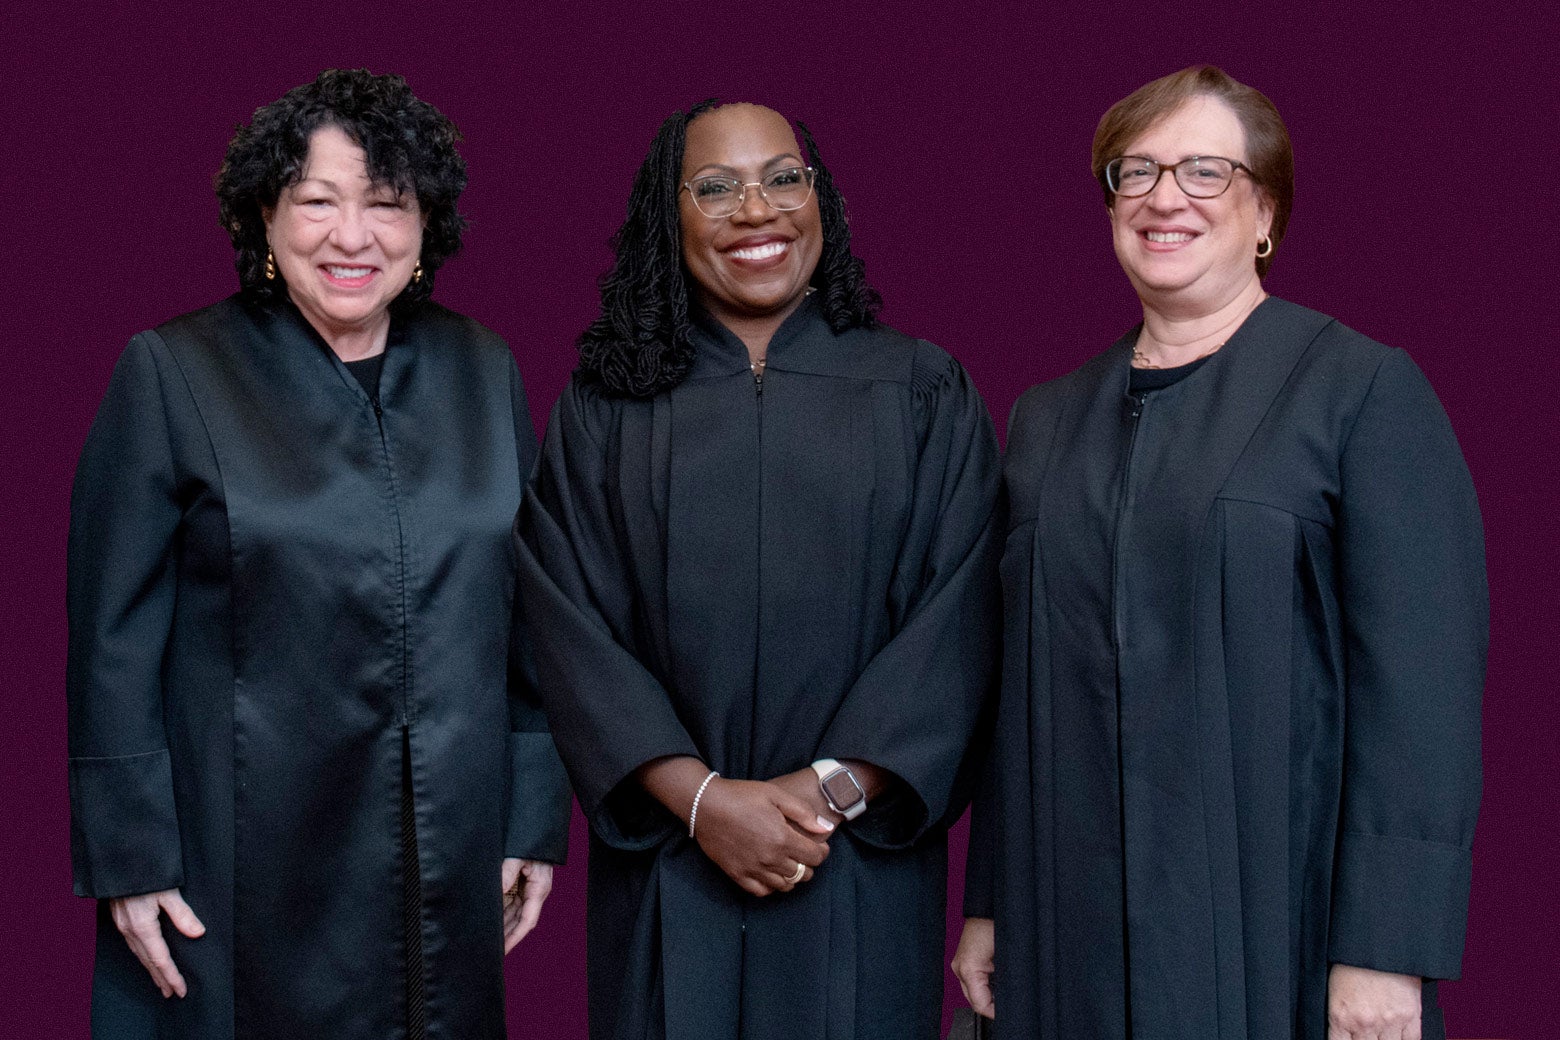 What Jackson, Kagan, and Sotomayor will try to do at the High Court this term.